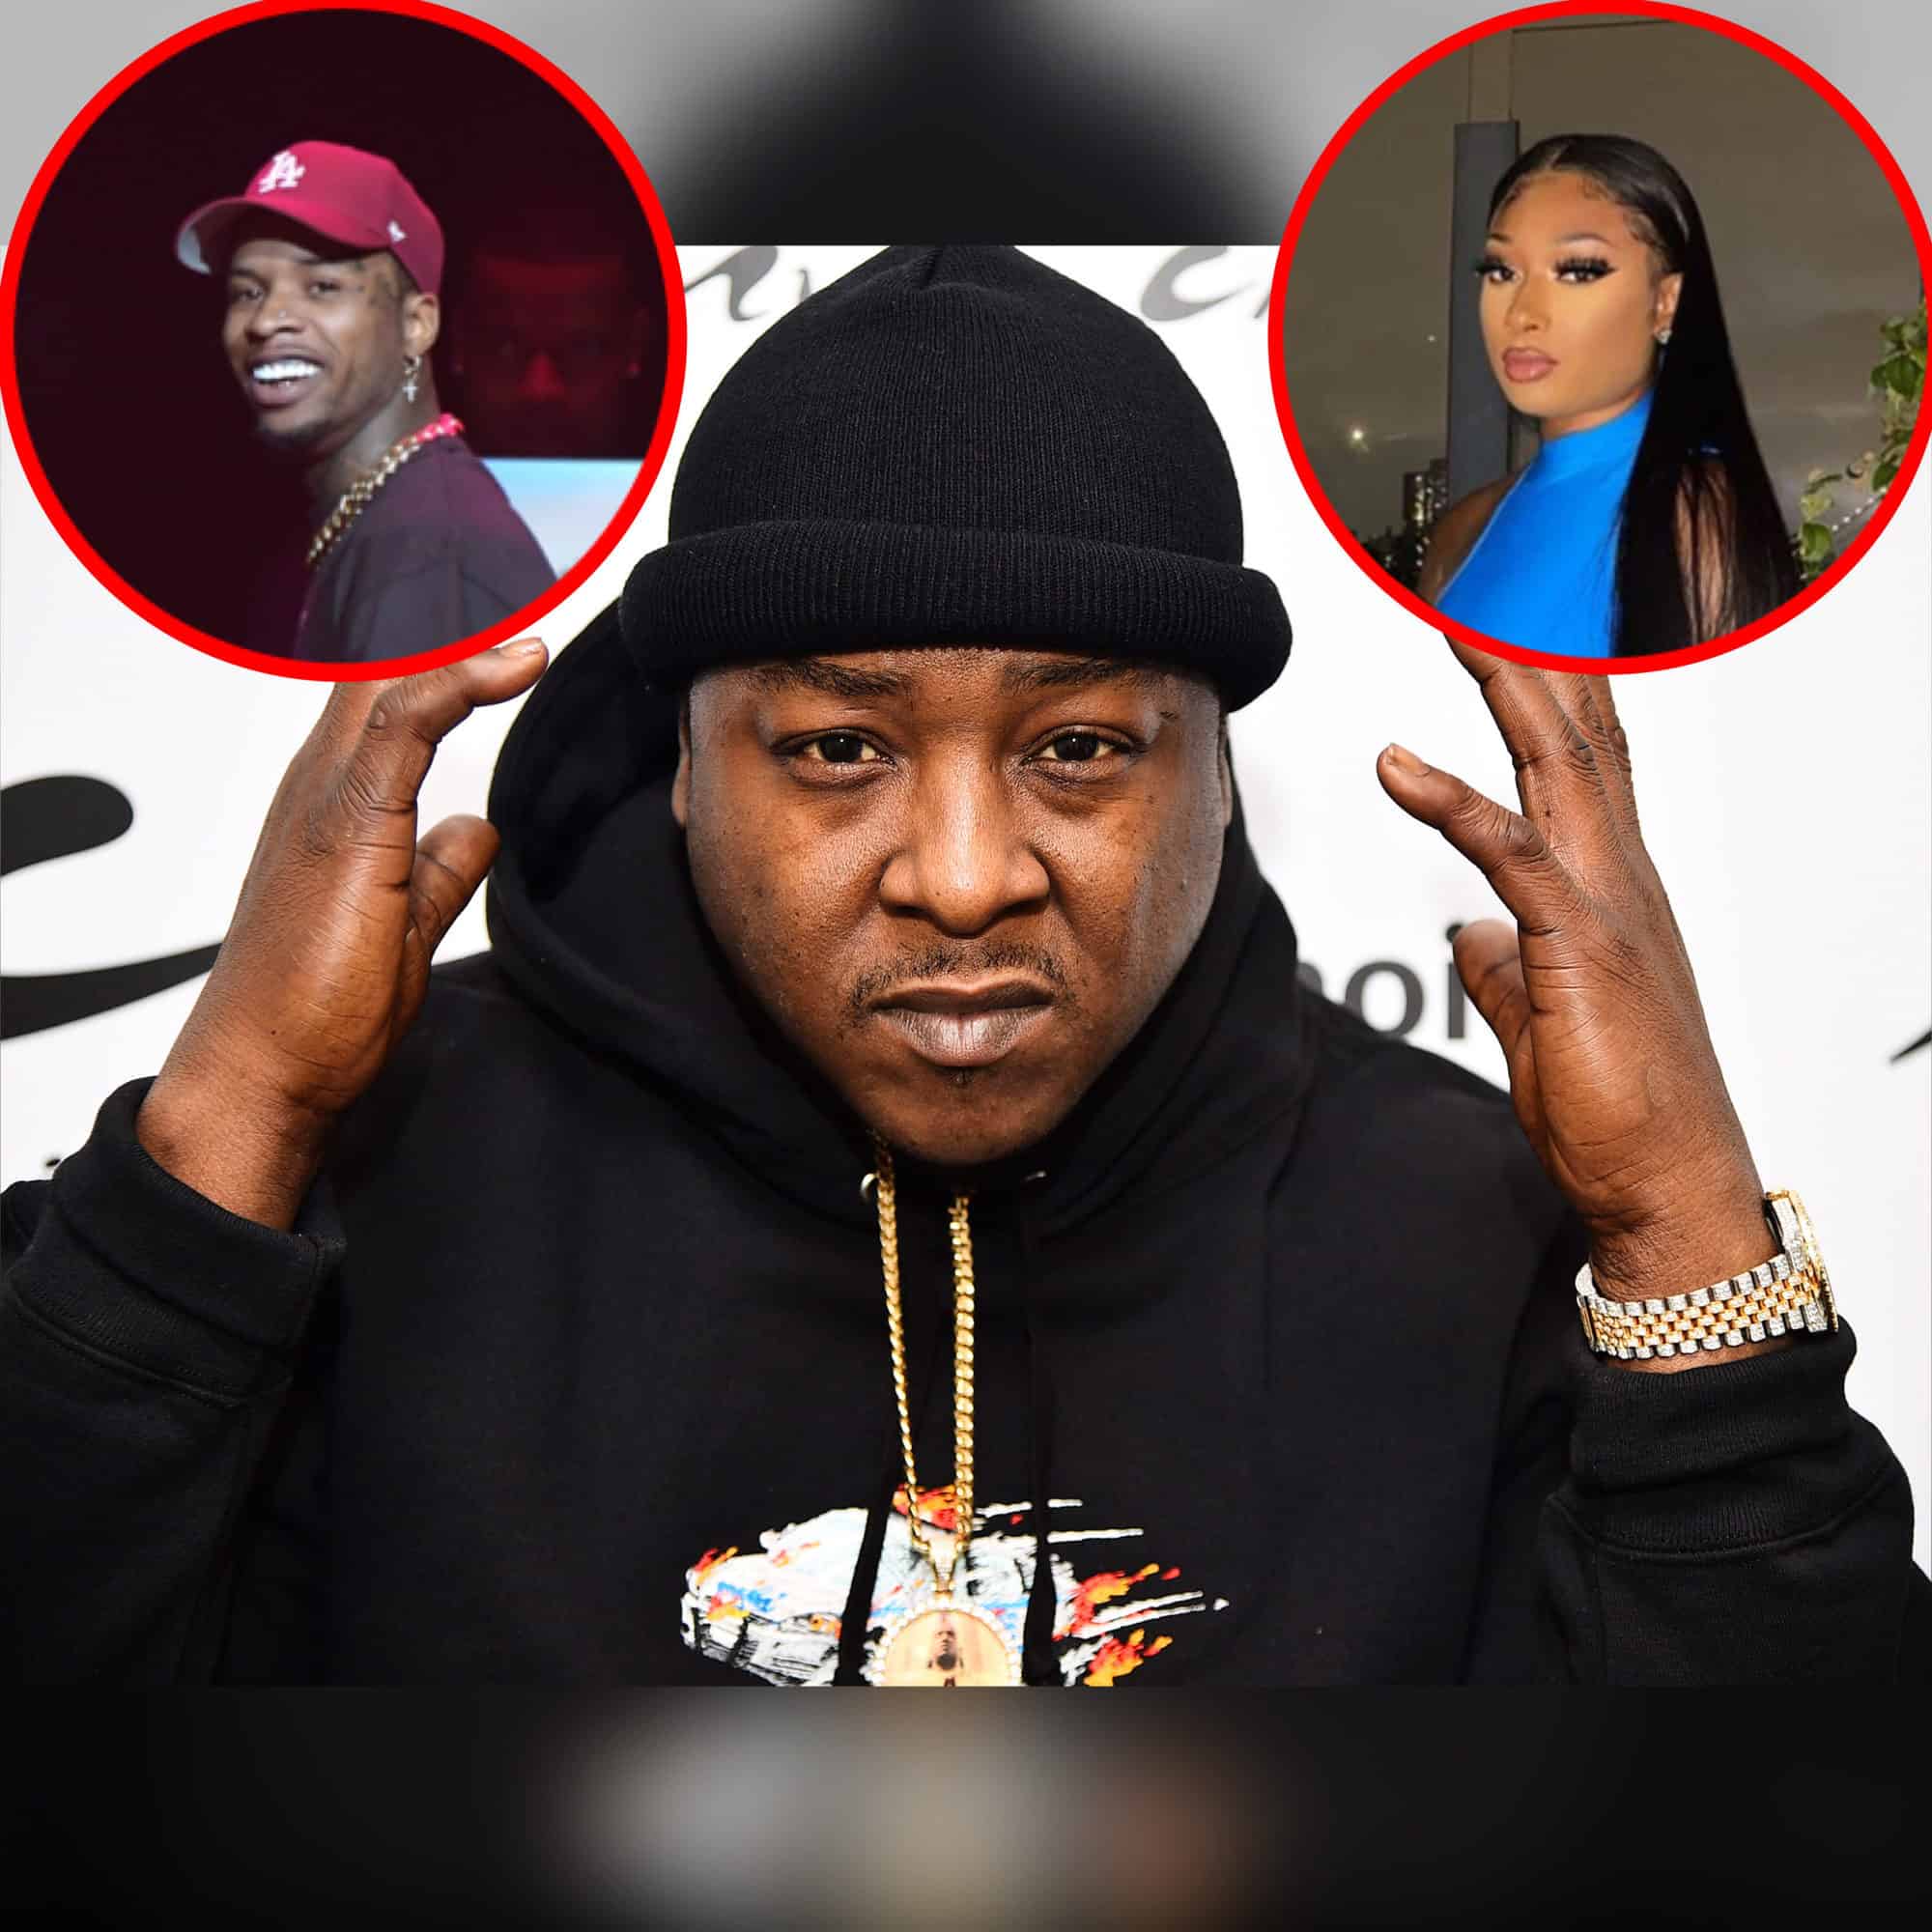 Jadakiss Dropped A Bar About Megan Thee Stallion Shooting In New Song